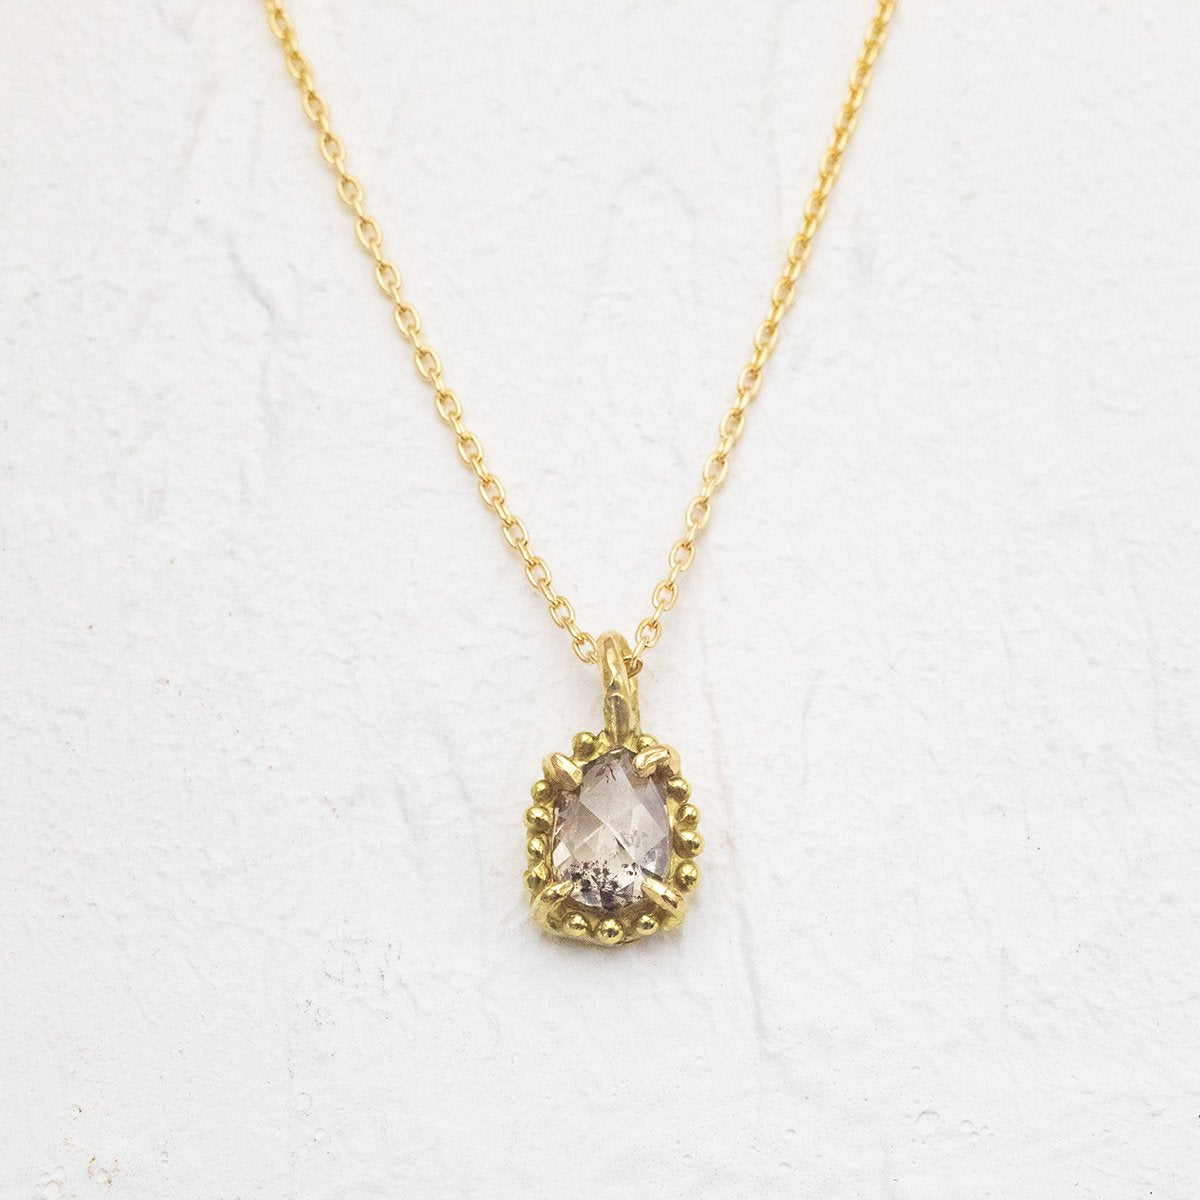 Salt and Pepper Diamond Necklace with Dot Frame (18k)